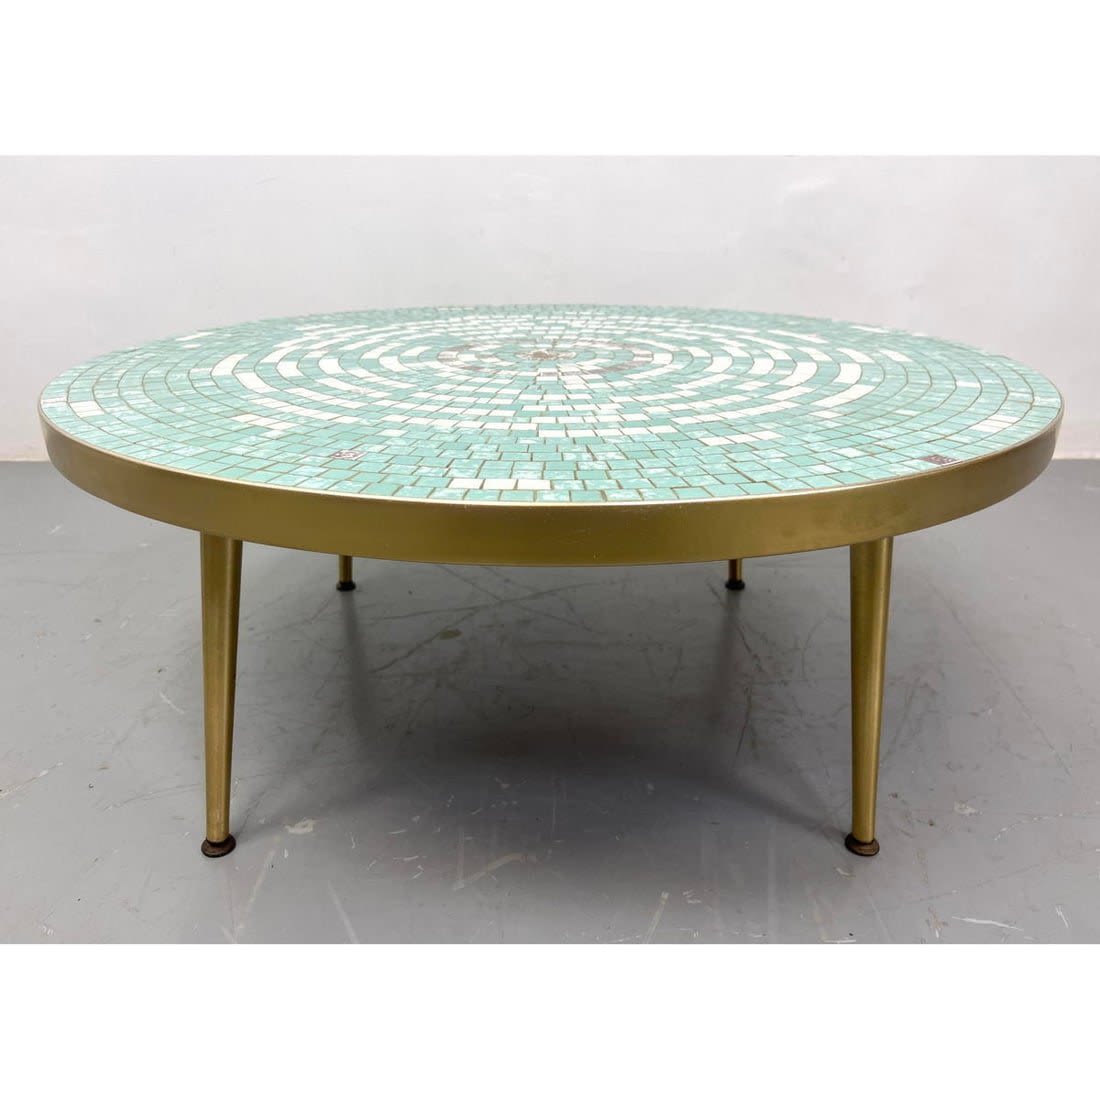 Round Glazed Tile Top Coffee table  3629ed